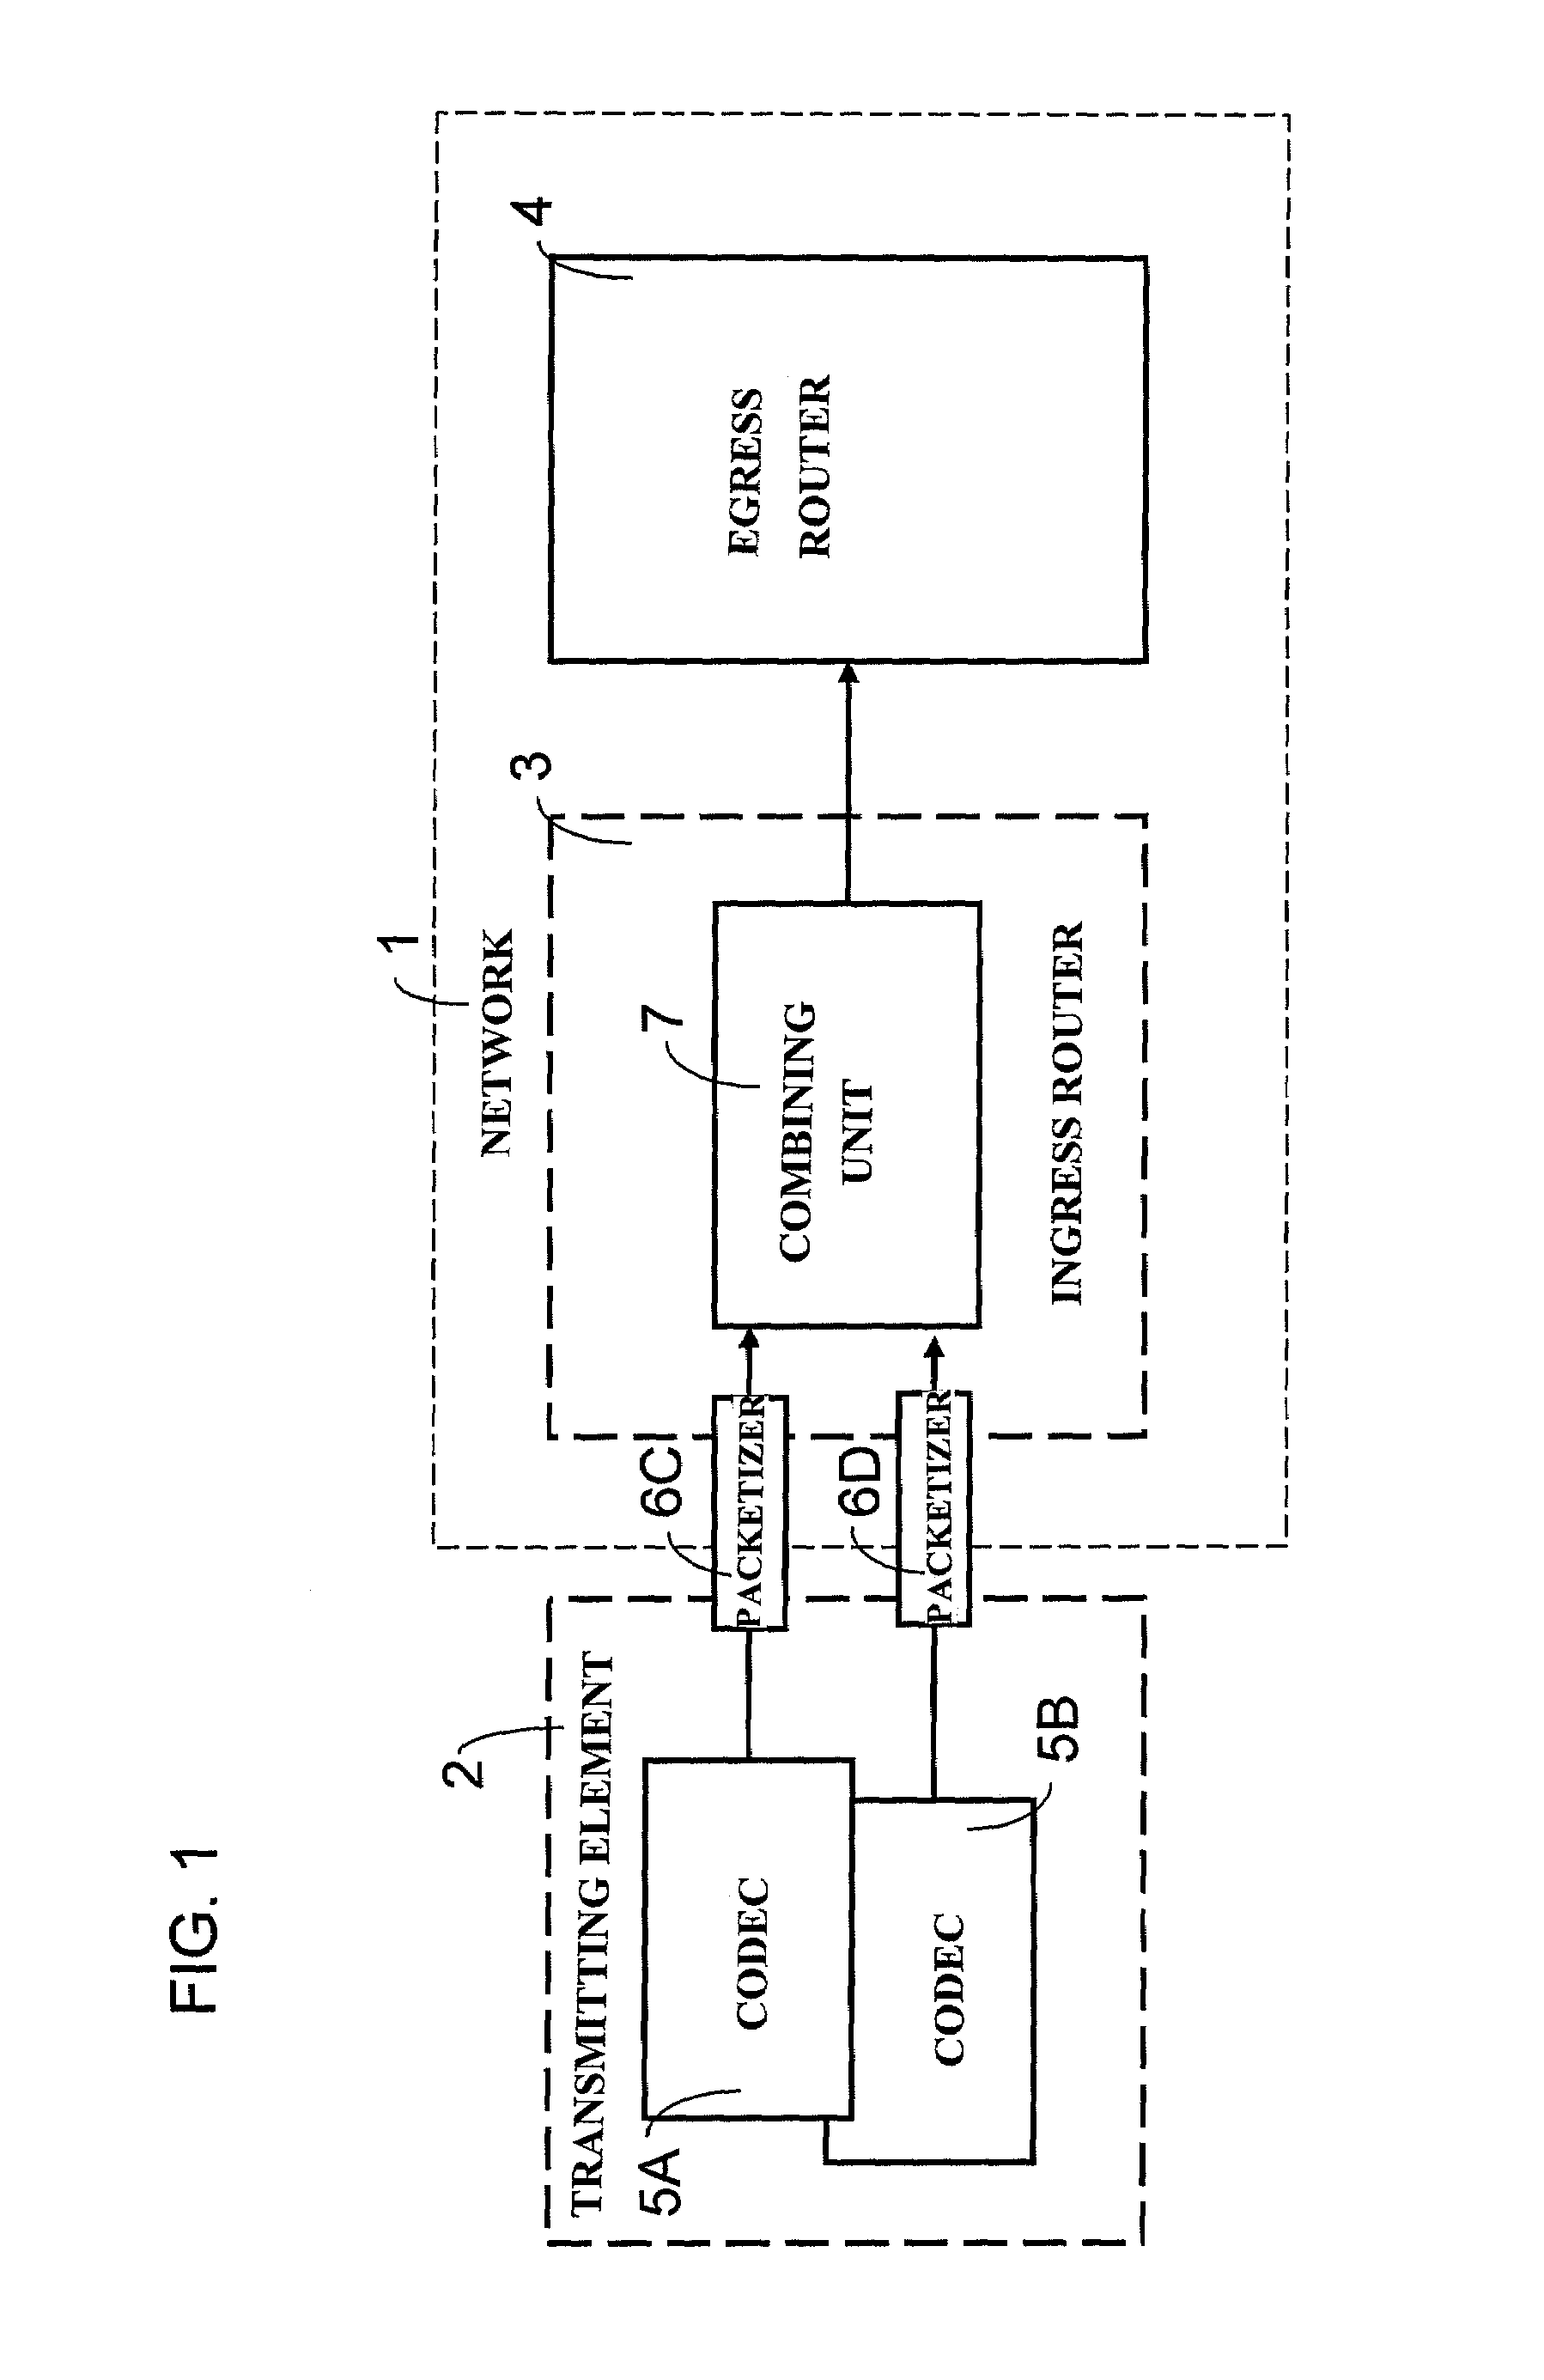 Method for optimizing the use of network resources for the transmission of data signals, such as voice, over an IP-packet supporting network